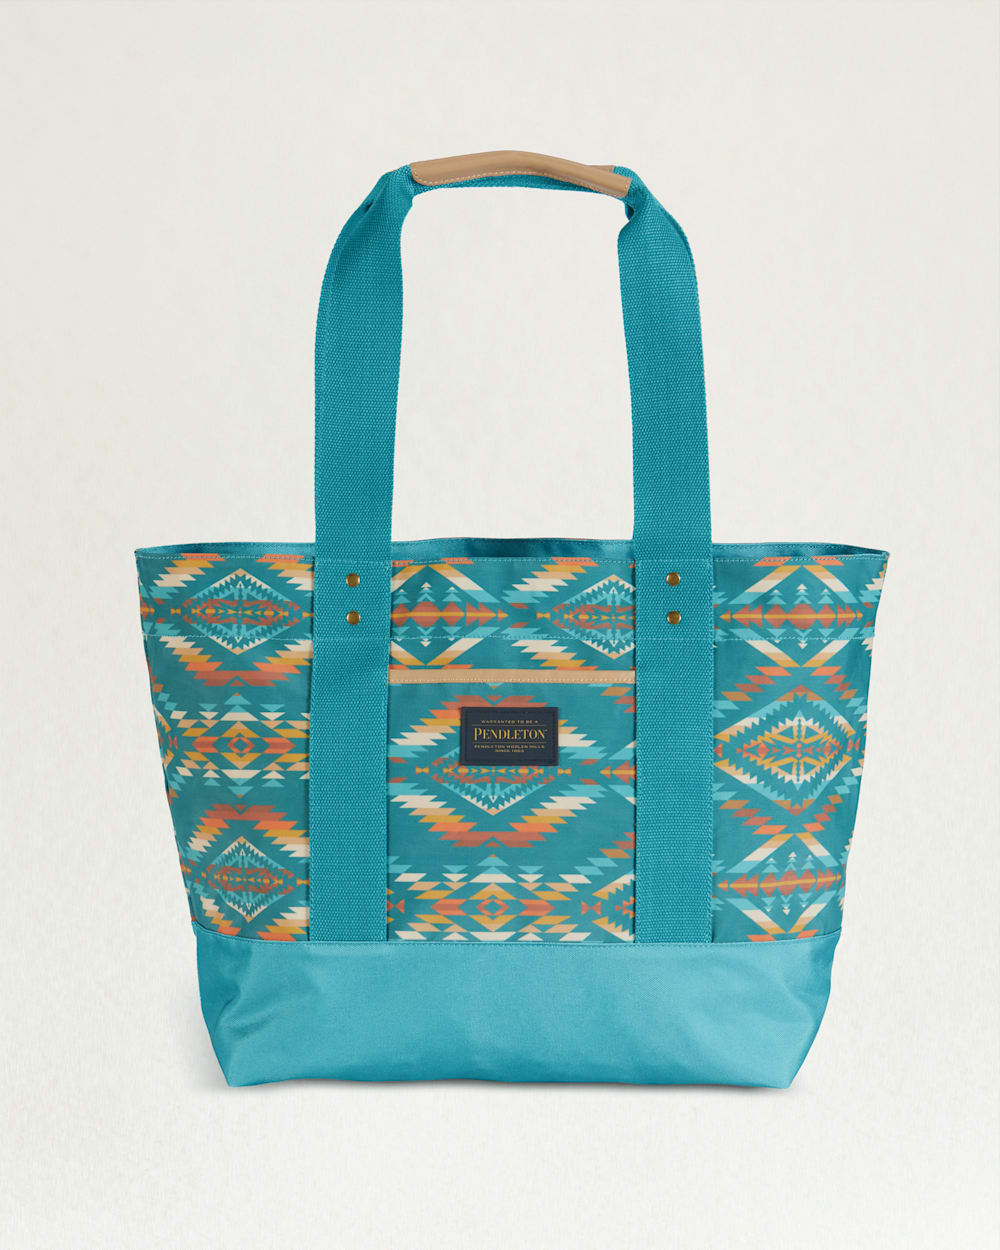 SUMMERLAND BRIGHT CANOPY CANVAS TOTE IN TURQUOISE image number 1